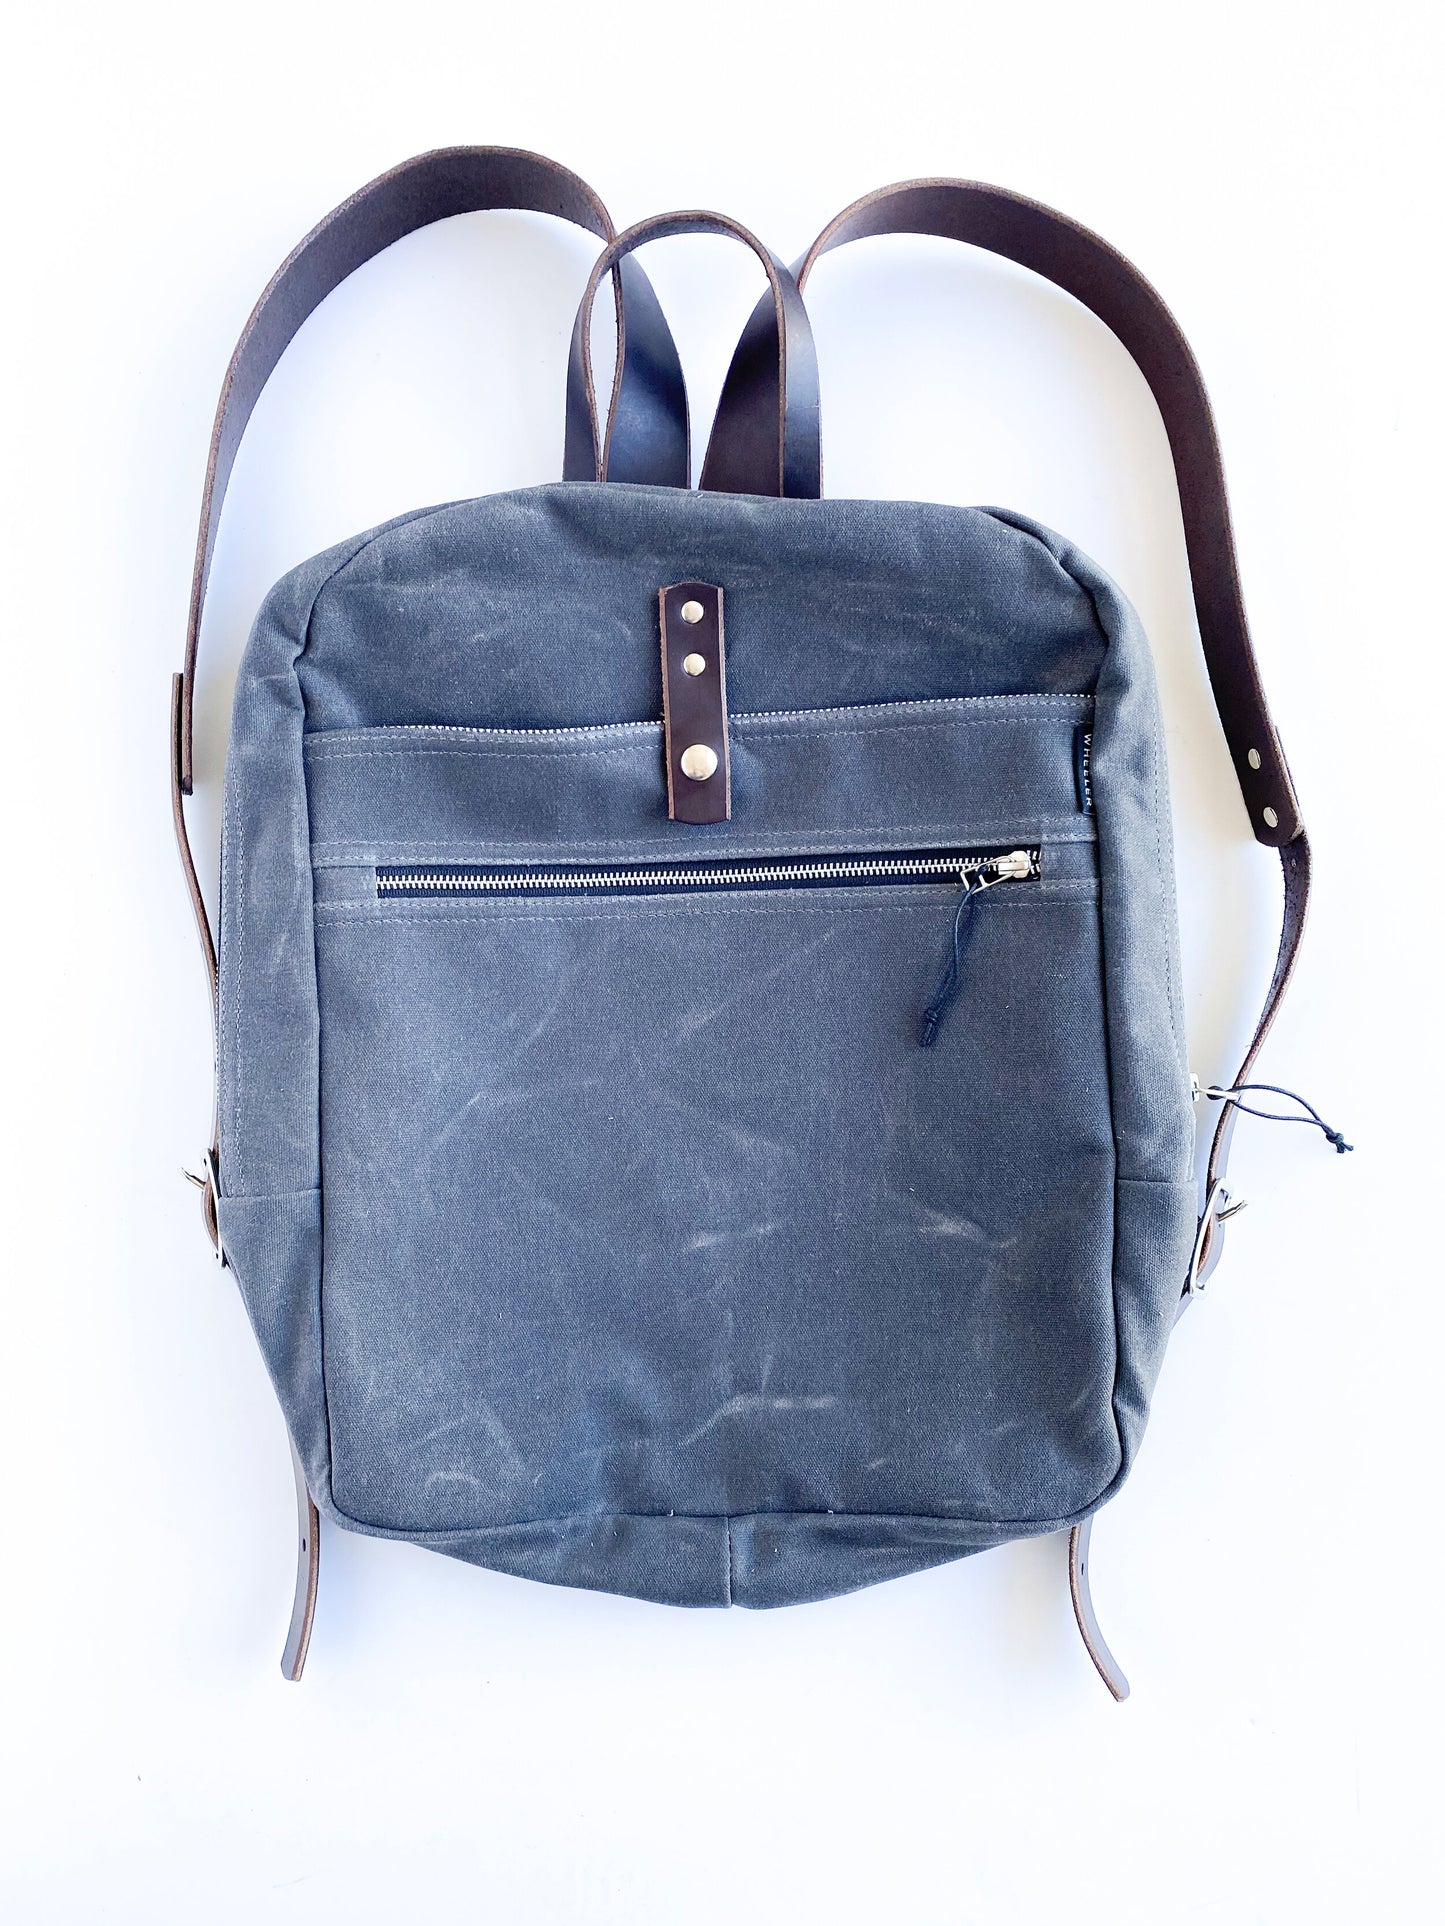 Slate, waxed cotton canvas backpack with brown leather straps.